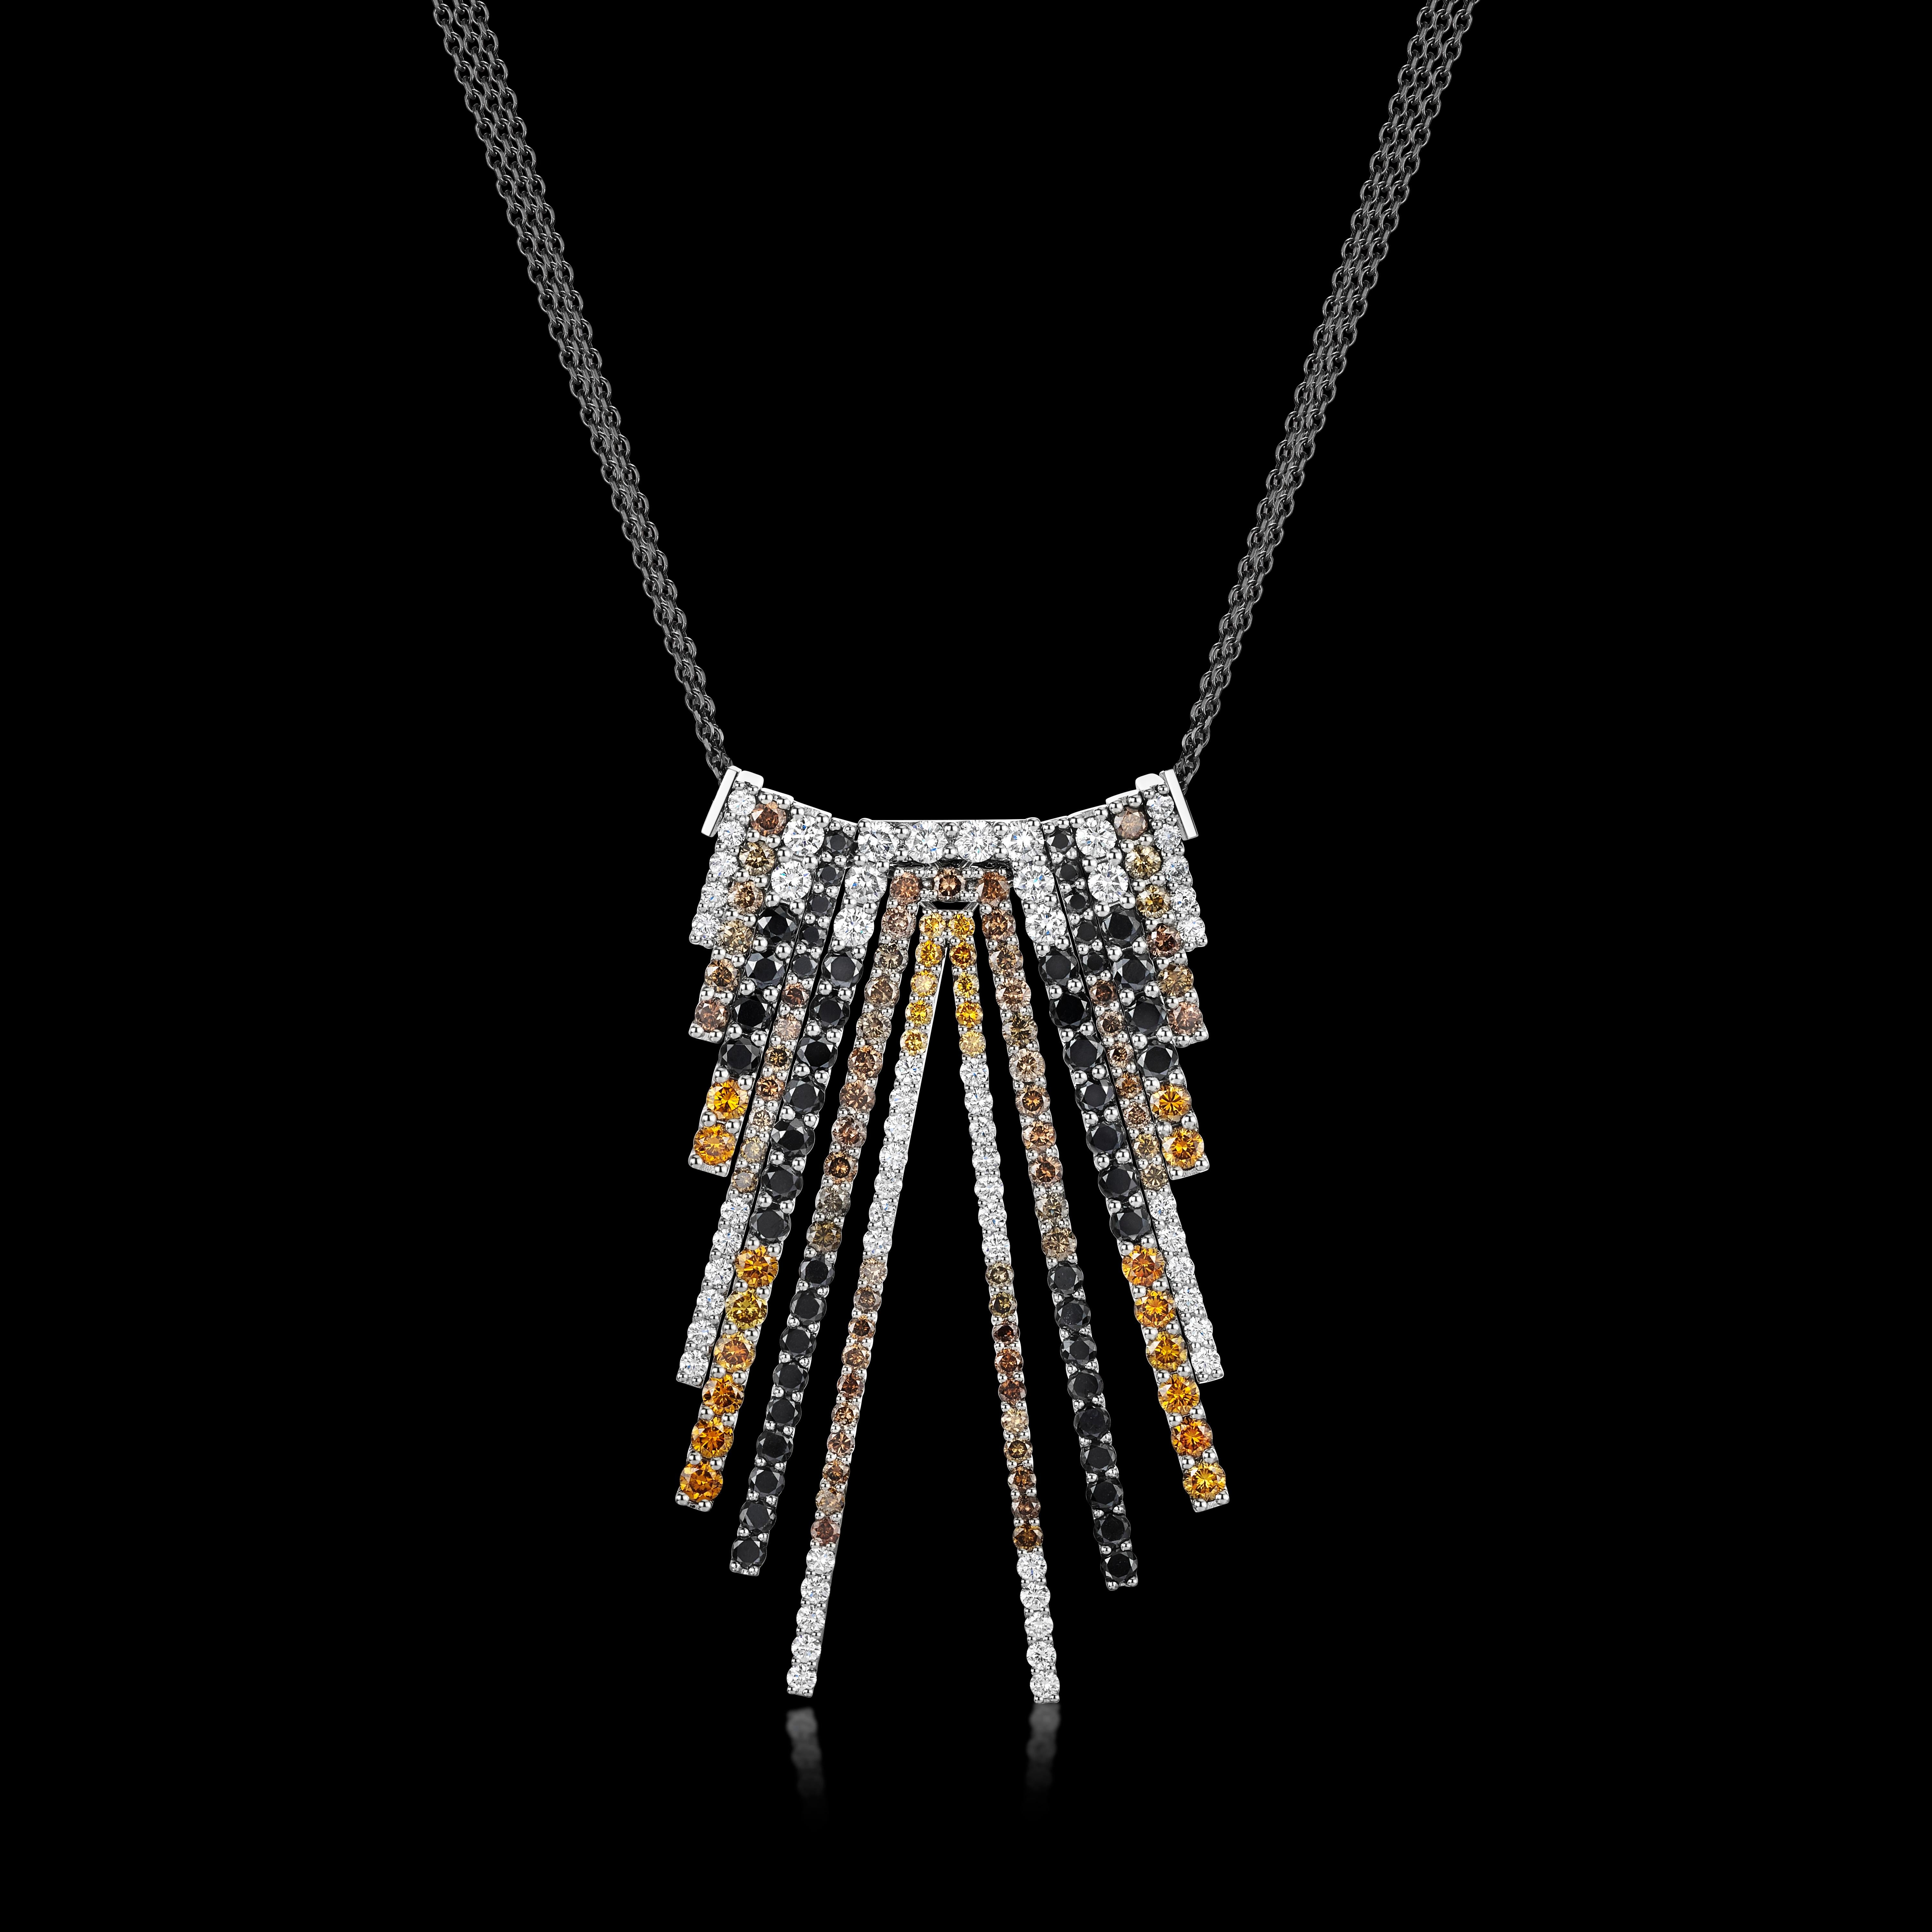 Inspired by the heavens above, The 'Nightsky' Diamond Necklace is a one-of-a-kind creation by Aventina-Spencer featuring an impressive 203 White, Orange, Champagne and Black Diamonds weighting a total of 21.95 carats expertly set in Platinum. 

The